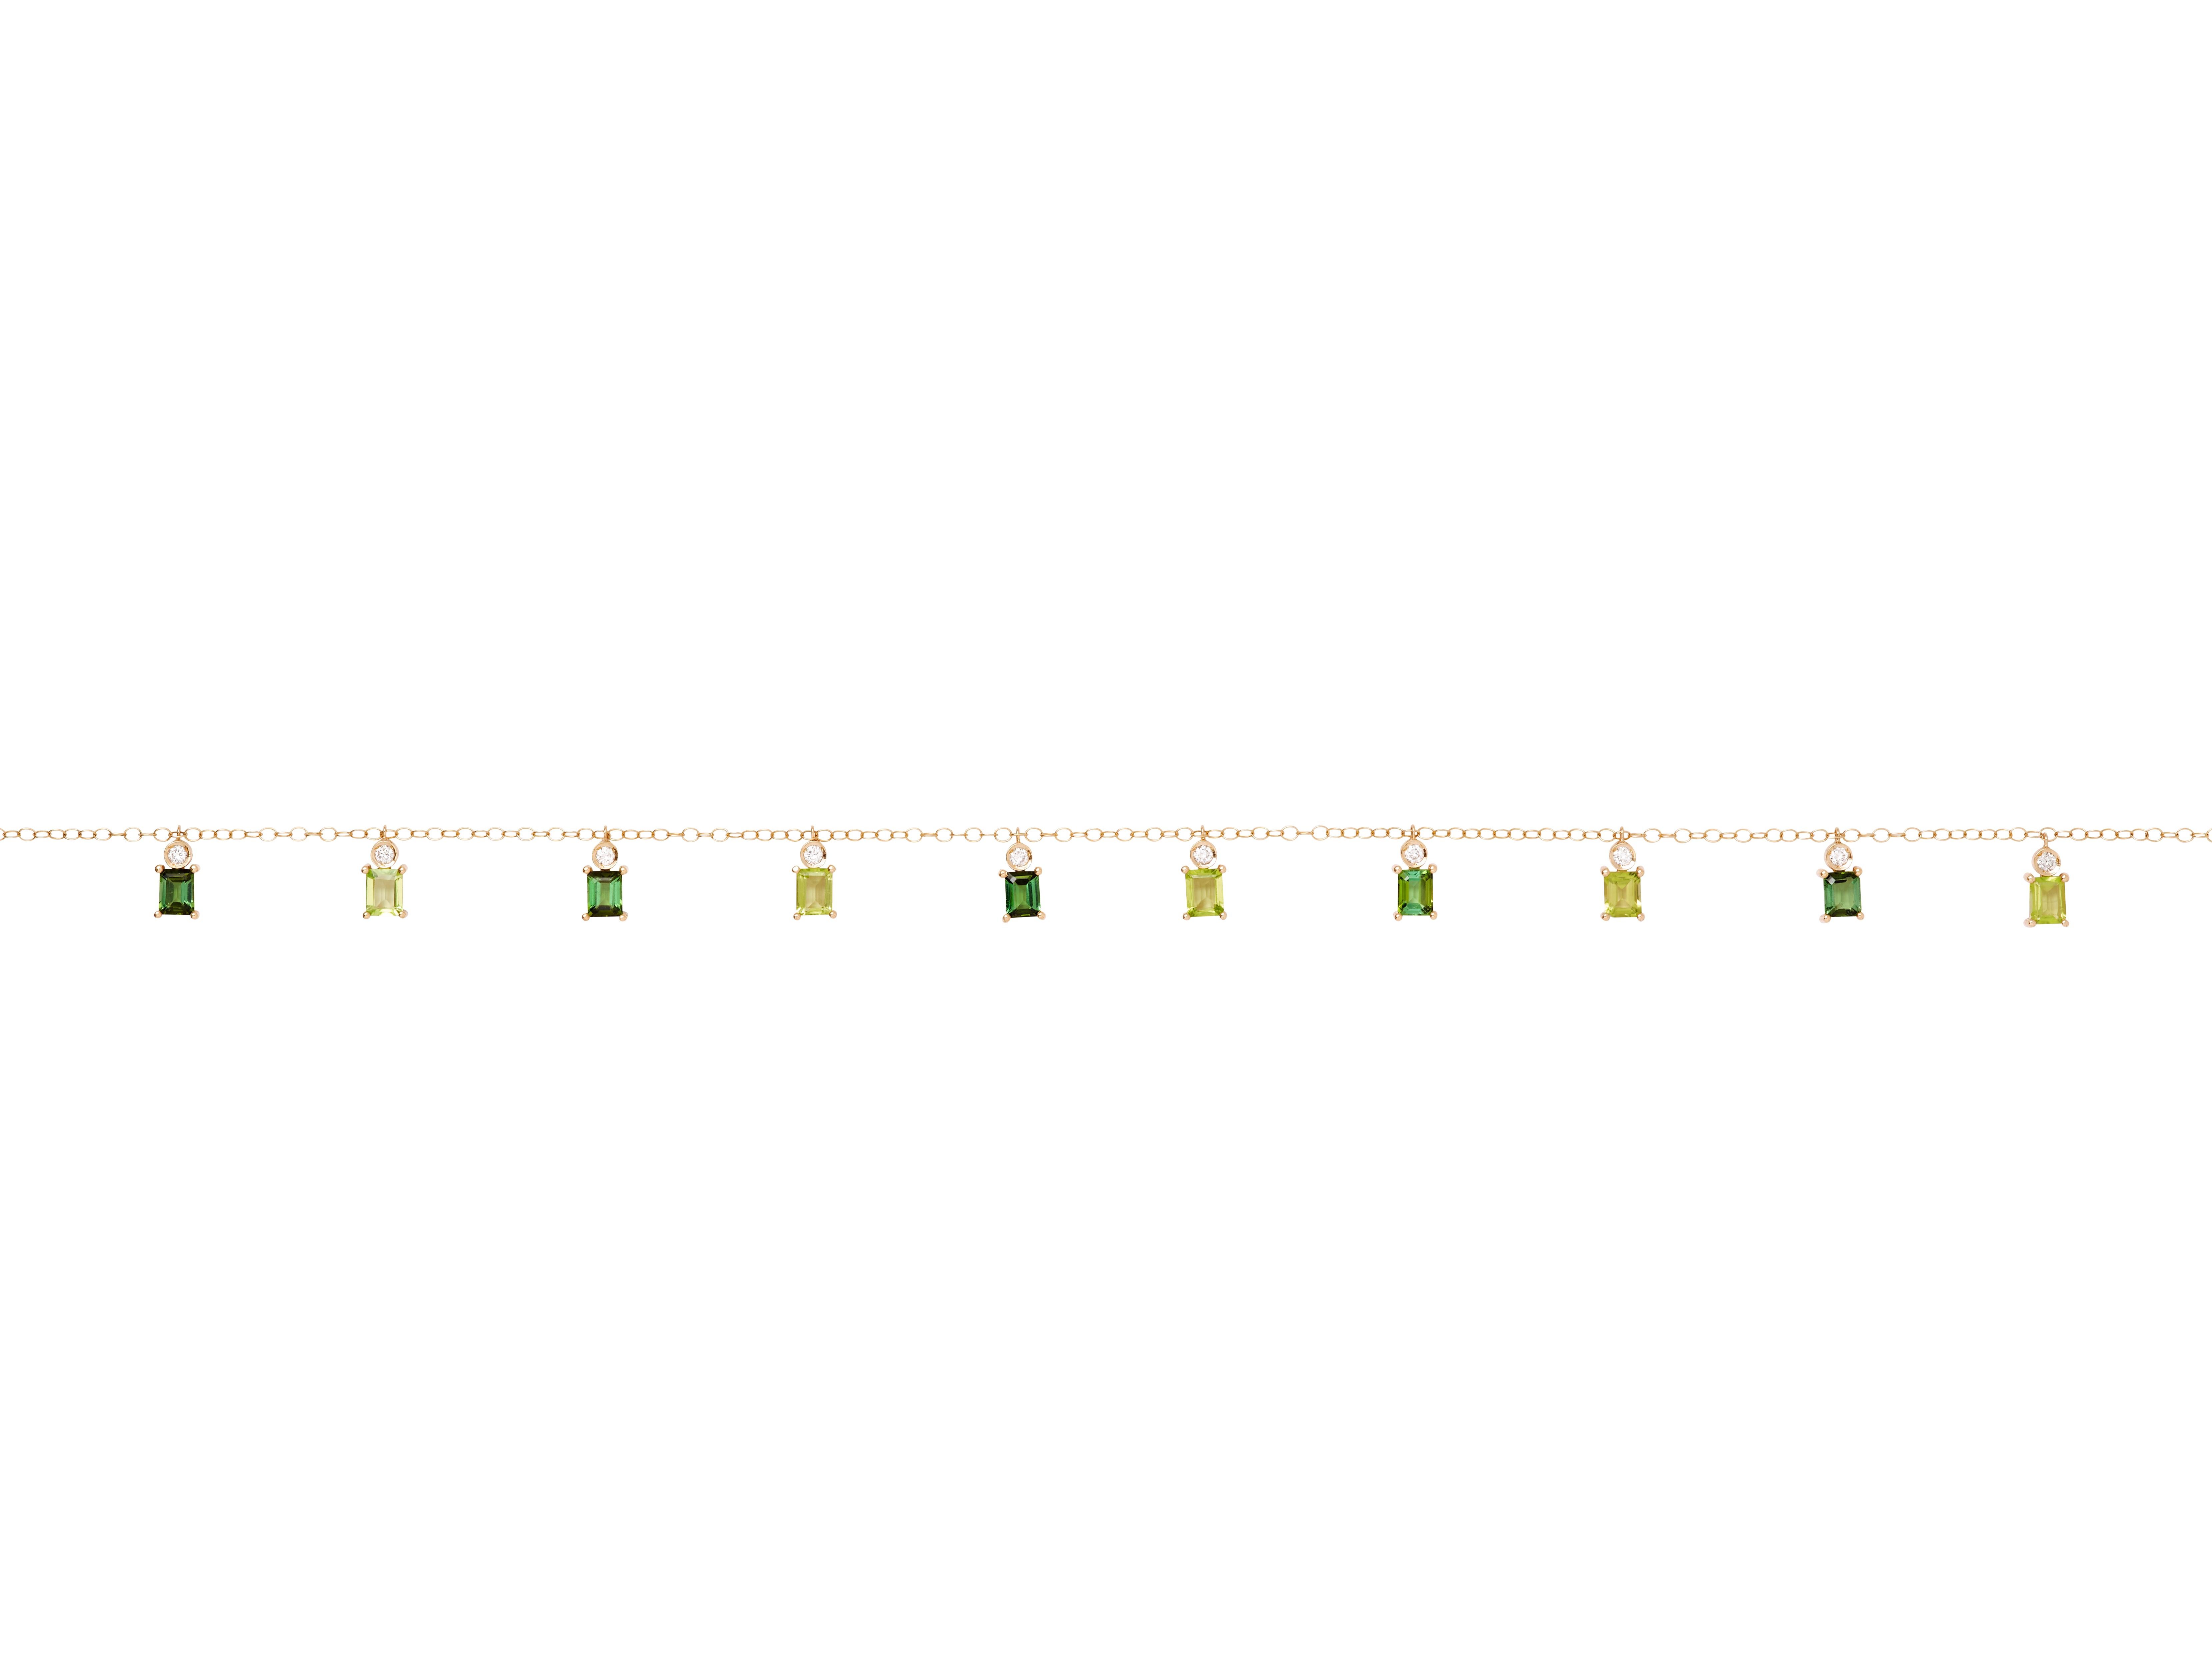 This beautifully delicate 18k yellow gold necklace featuring ten semi-precious Tourmaline, Peridot and Diamond charms that can be worn alone, or layered with other necklaces to create a playful and effortlessly stylish look. Can be worn at multiple